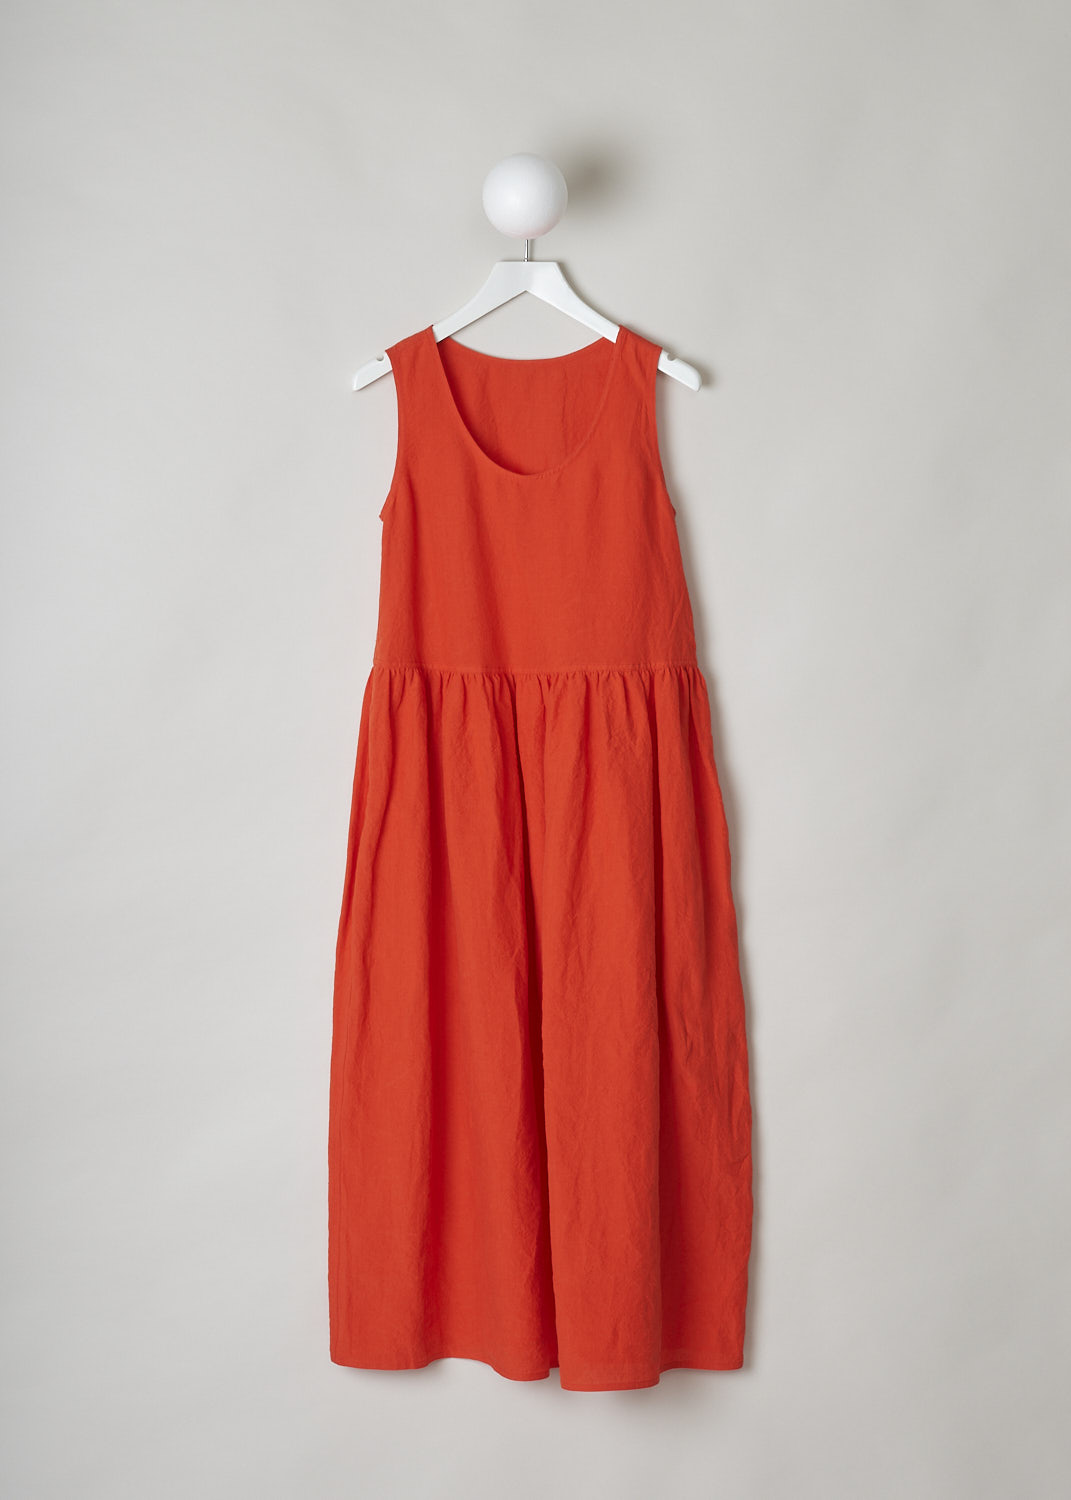 SOFIE Dâ€™HOORE, BRIGHT RED LINEN DRESS, DANDLE_LIFE_RED_PEPPER, Red, Front, This bright red sleeveless dress has U-neckline. The dress has a wide A-line silhouette. A straight crystal pleated hemline separates the bodice from the midi length skirt. Concealed slanted pockets can be found in the side seam. 
